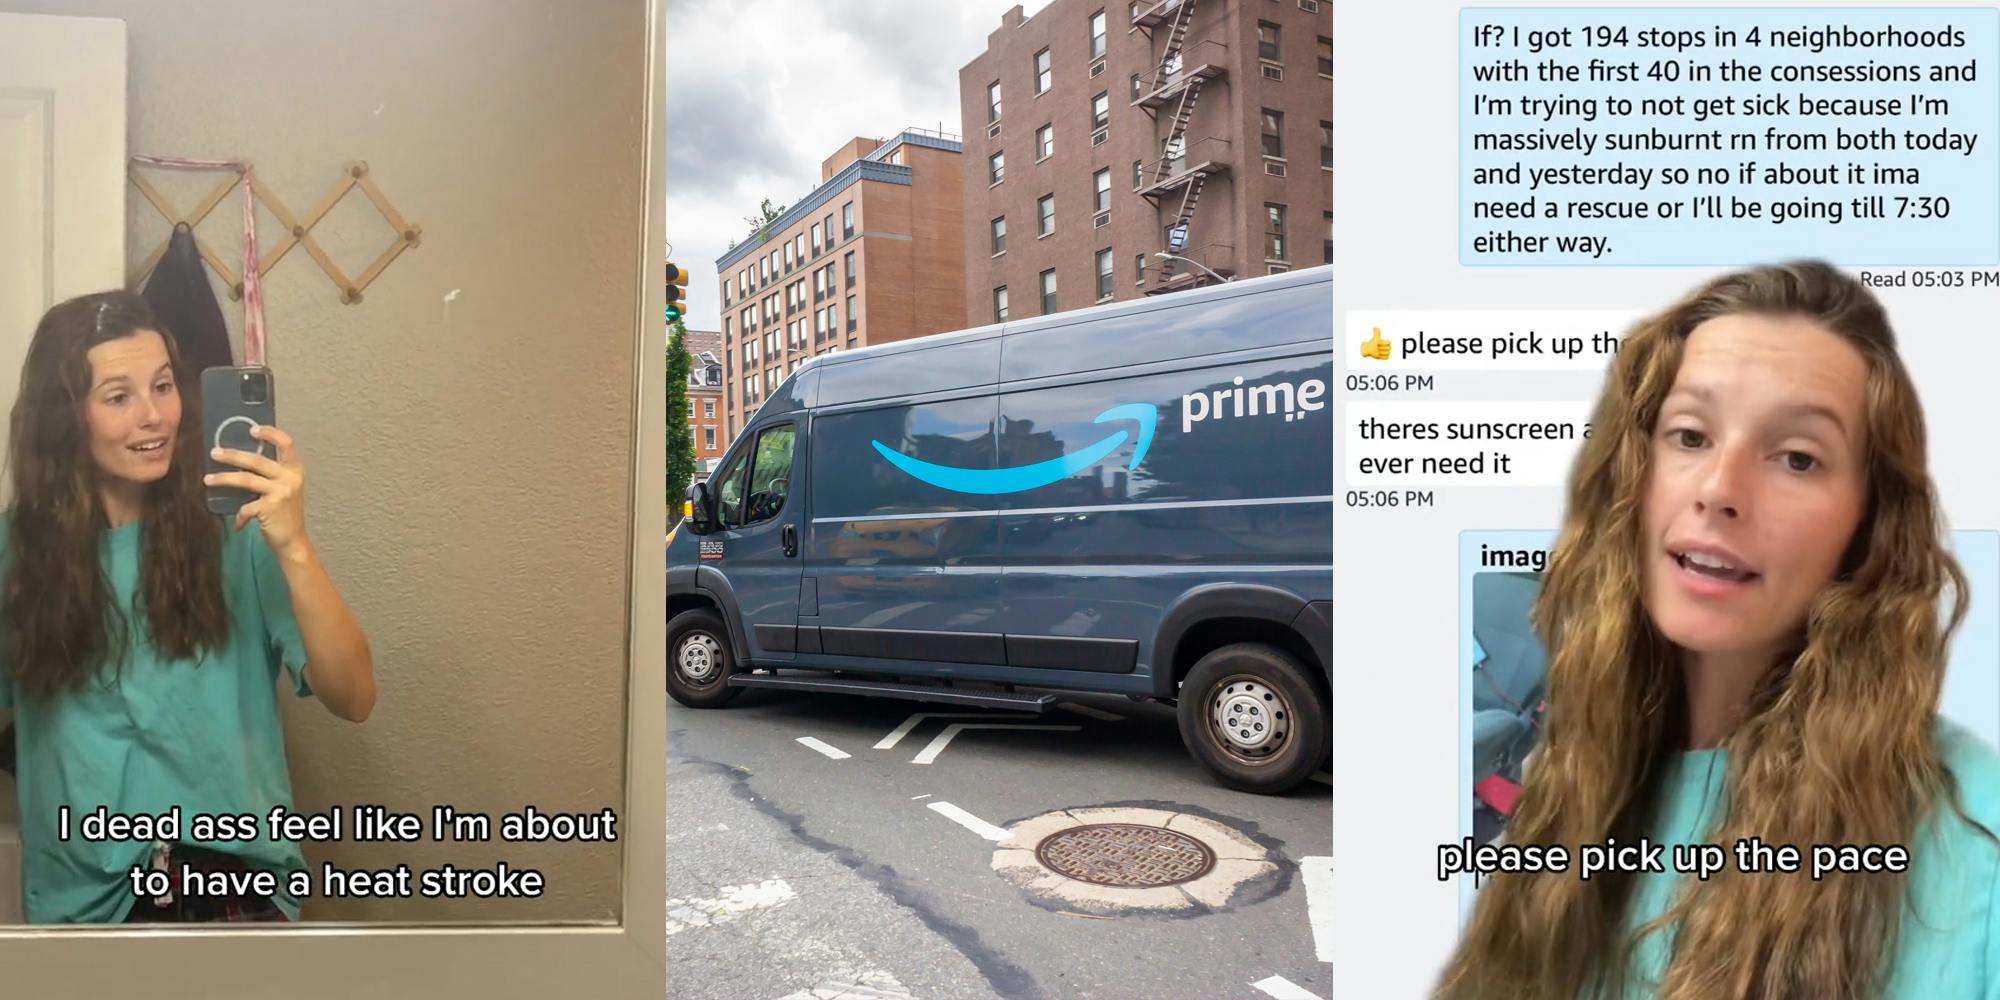 Amazon driver speaking in mirror with caption "I dead ass feel like I'm about to have a heat stroke" (l) Amazon Prime truck in street (c) Amazon driver greenscreen TikTok over messages "If? I got 194 stops in 4 neighborhoods with the first 40 in the consessions and I'm trying to not get sick because I'm massively sunburnt rn both today and yesterday so no if about it ima need a rescue or I'll be going till 7:30 either way. please pick up the pace" with caption "please pick up the pace" (r)